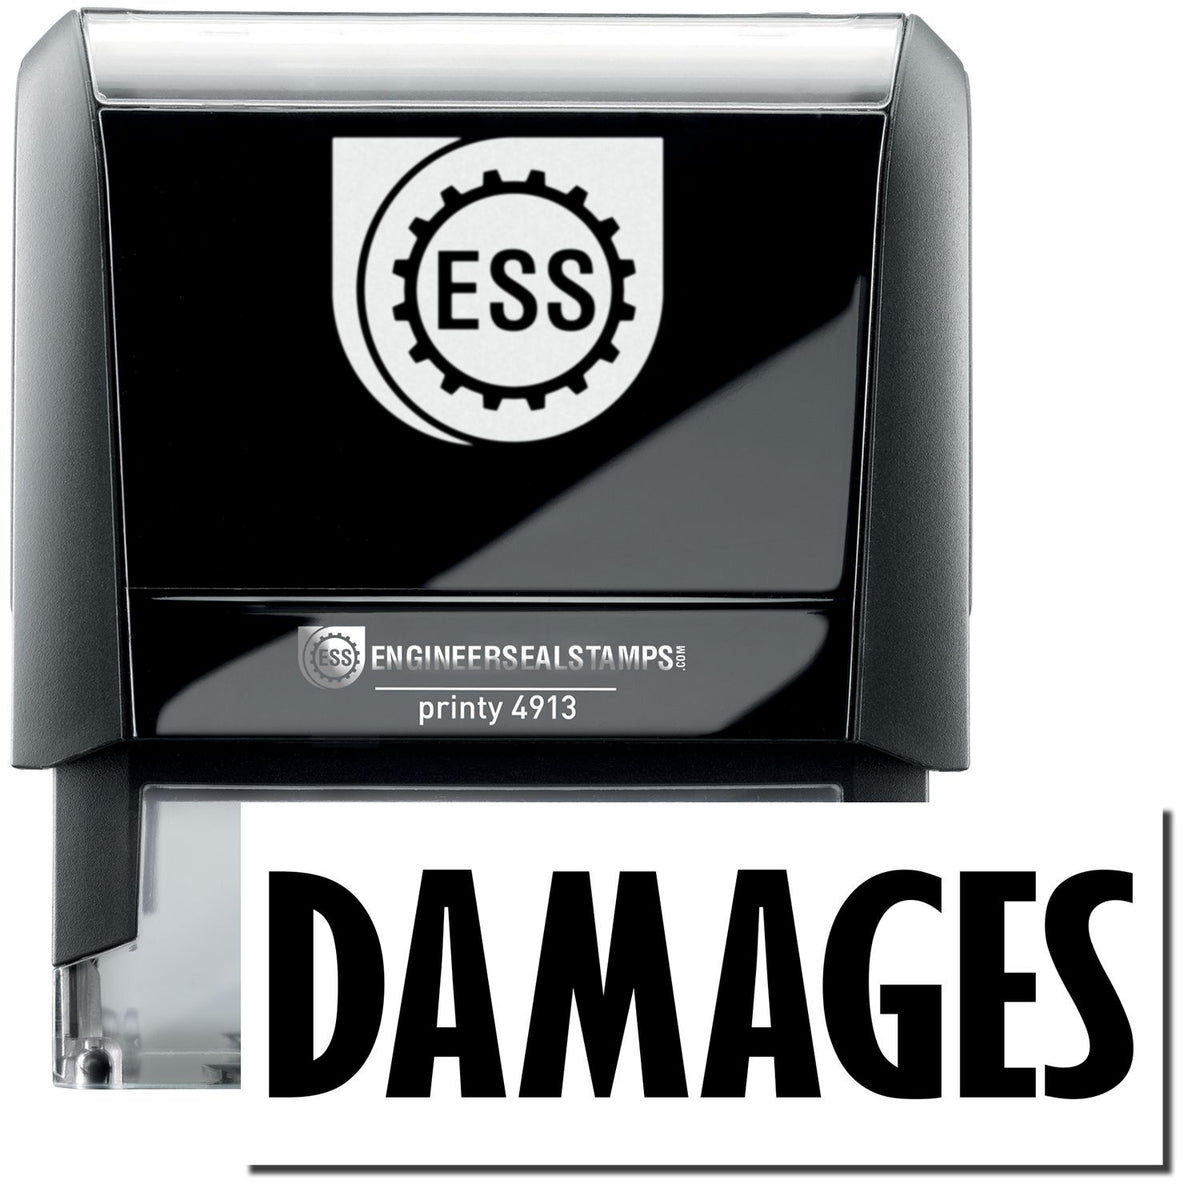 A self-inking stamp with a stamped image showing how the text &quot;DAMAGES&quot; in a large bold font is displayed by it.